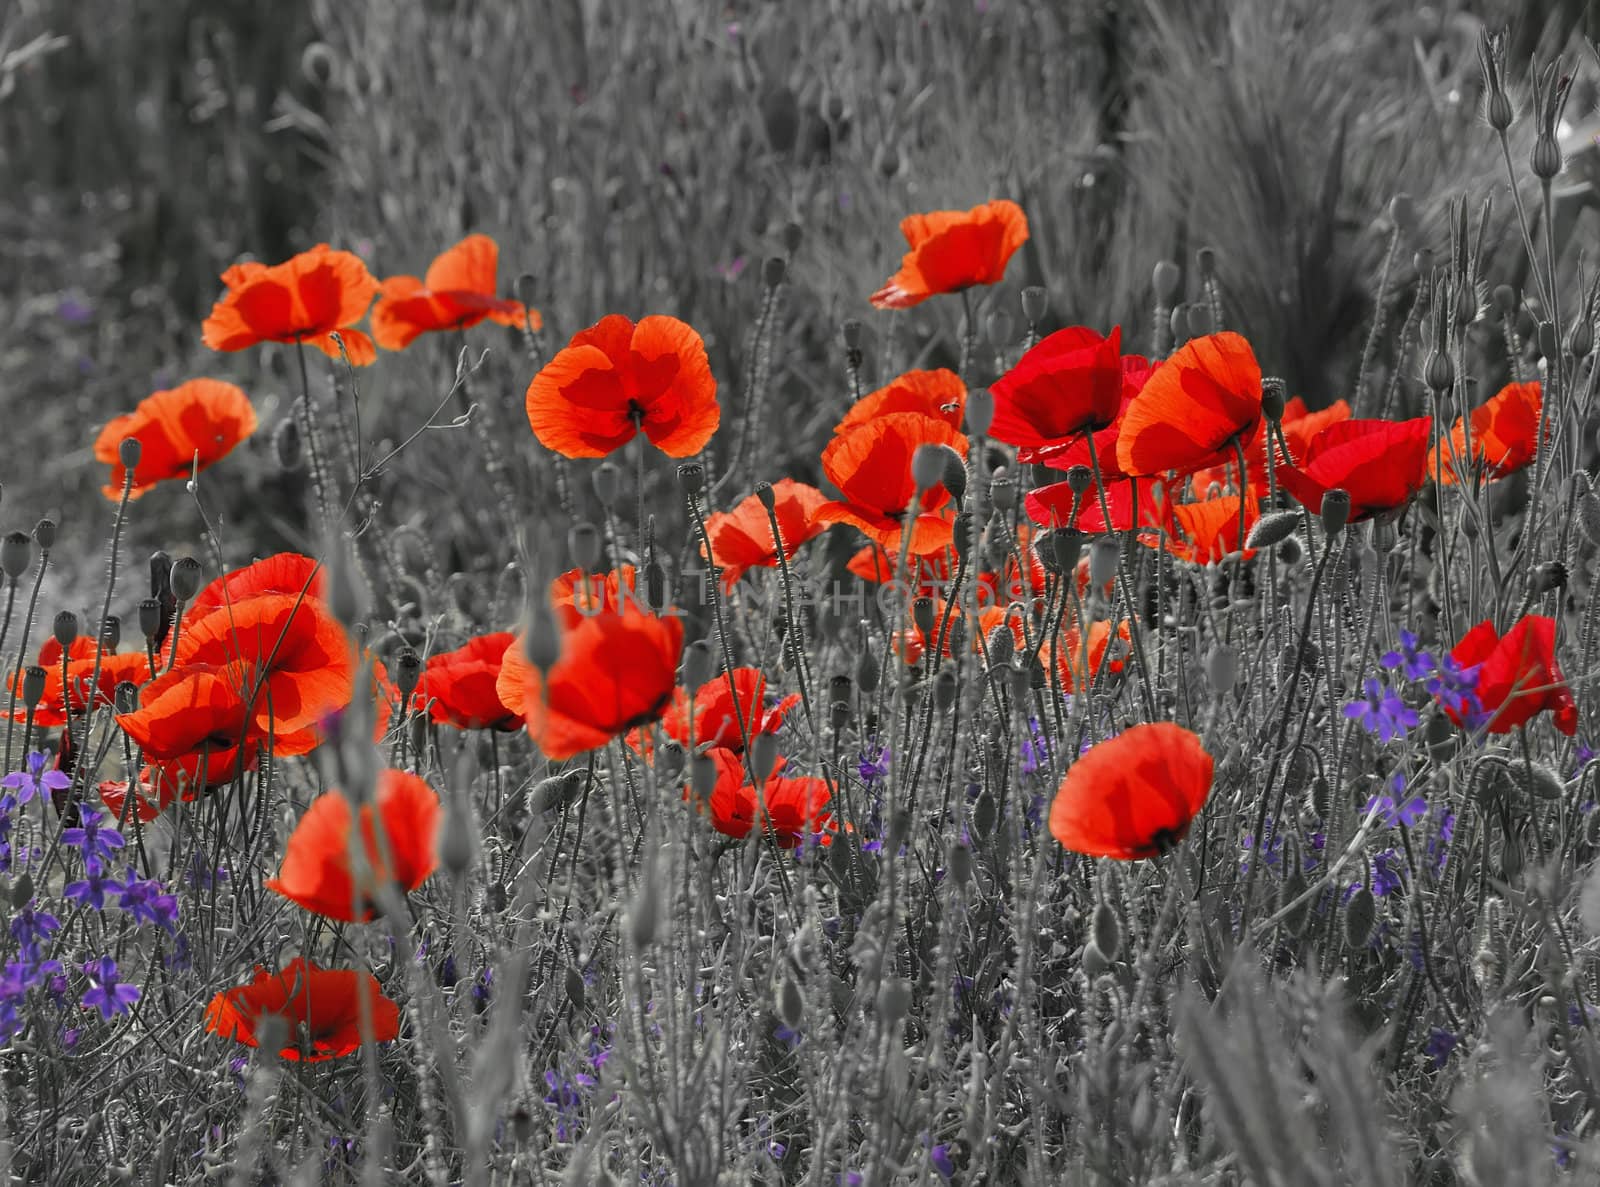 Field poppies by whitechild